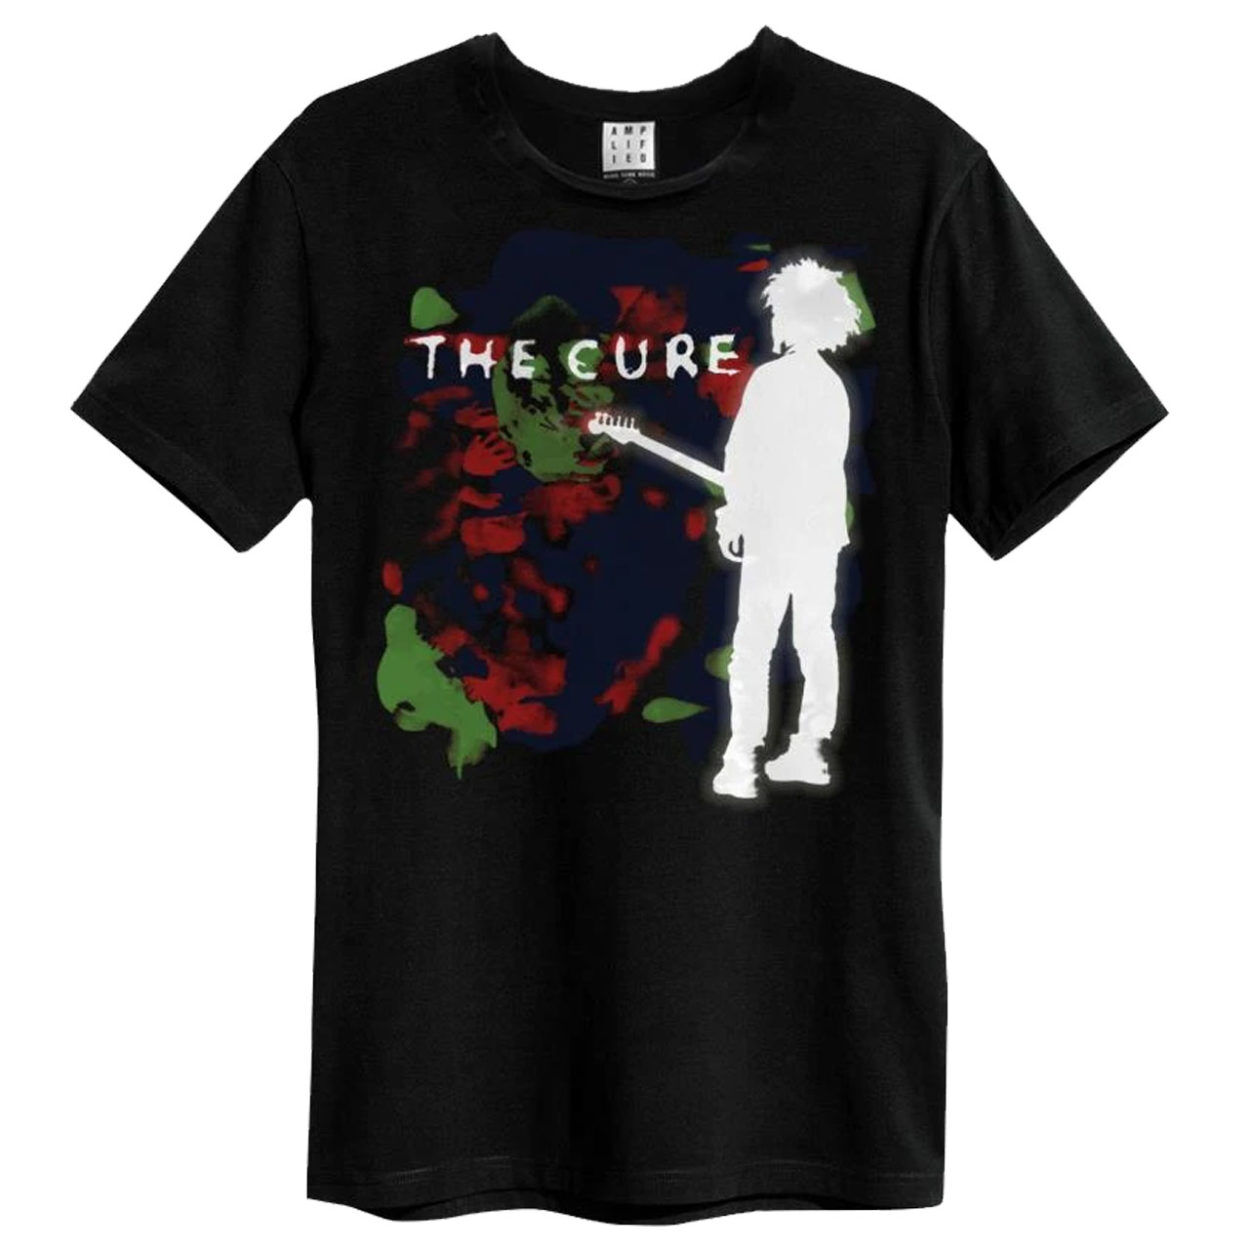 The Cure Boys Don't Cry Colors Tshirt